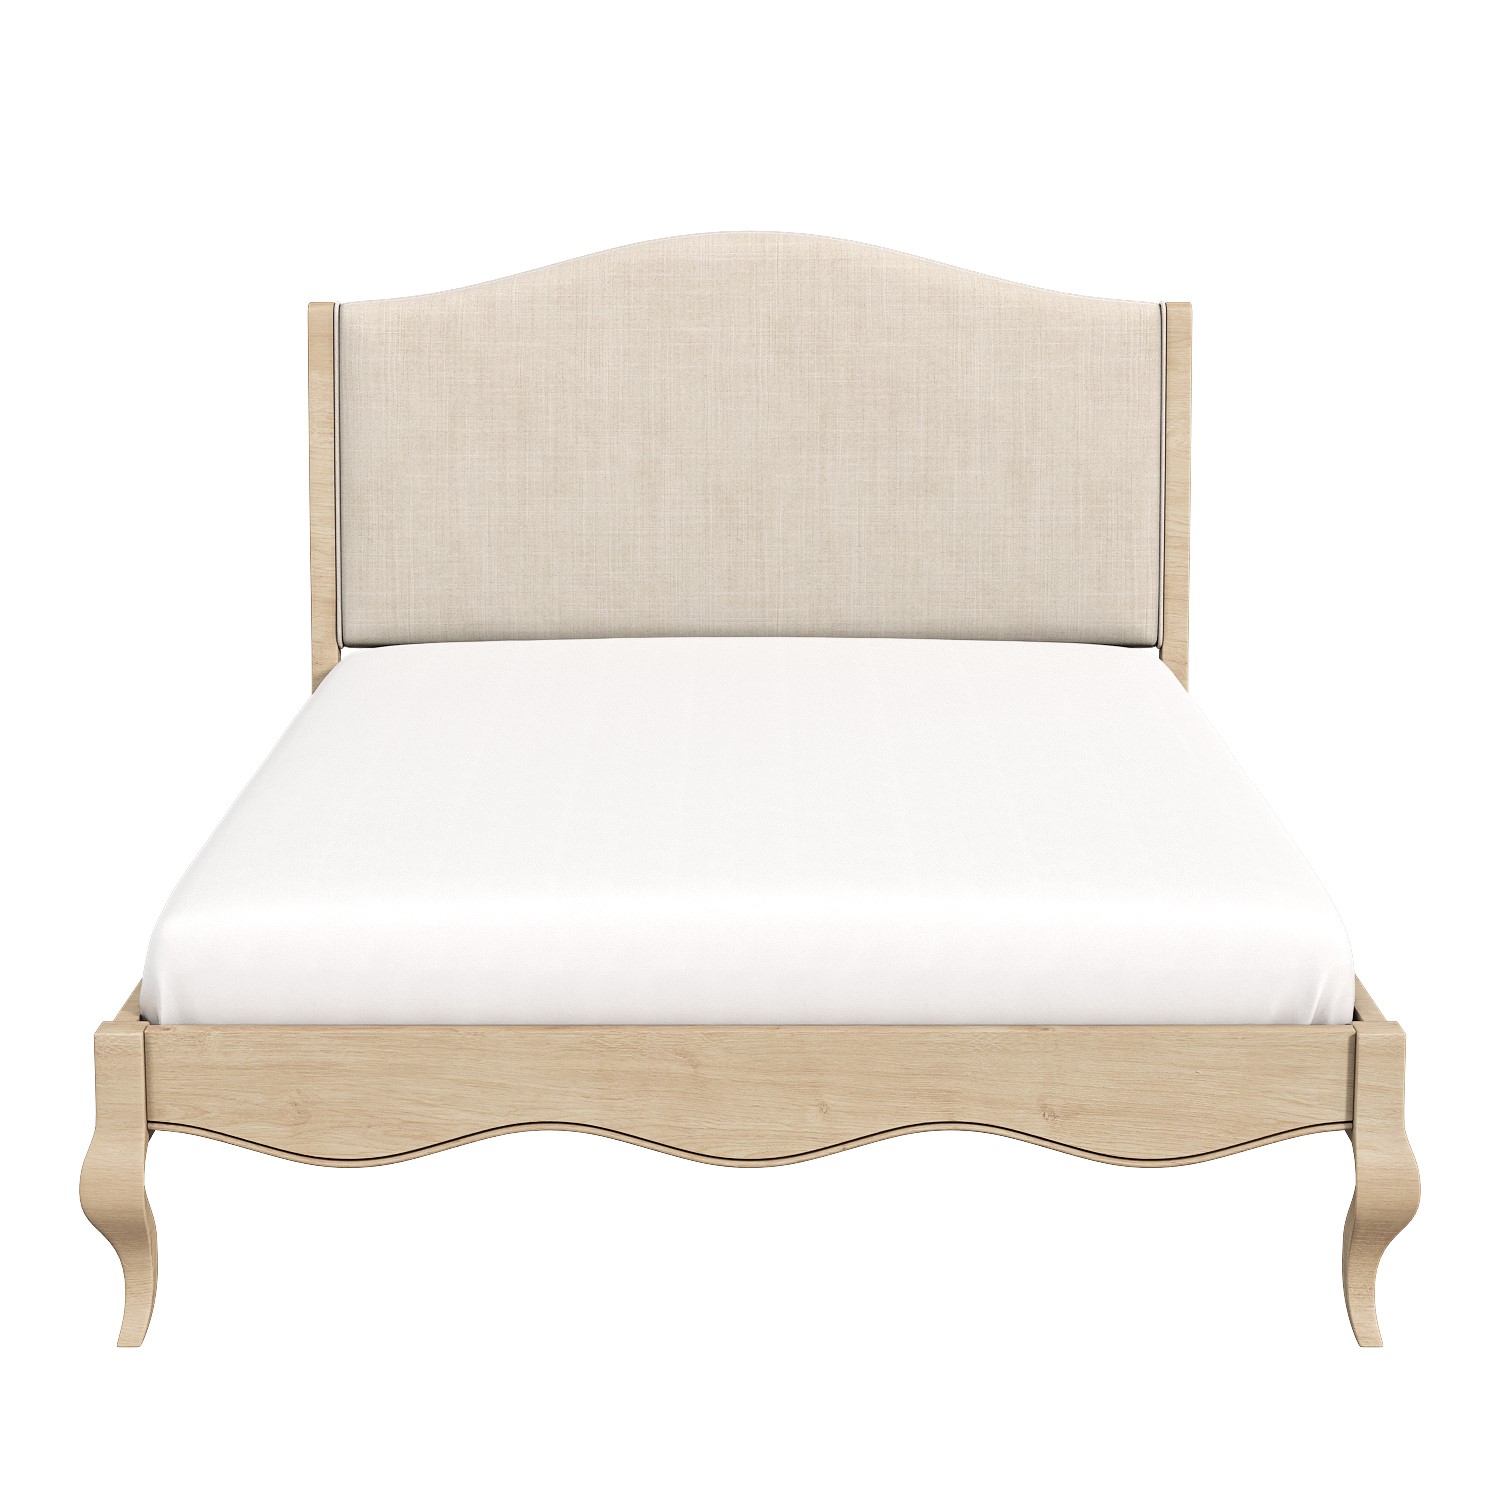 Read more about French beige linen double bed frame genevieve